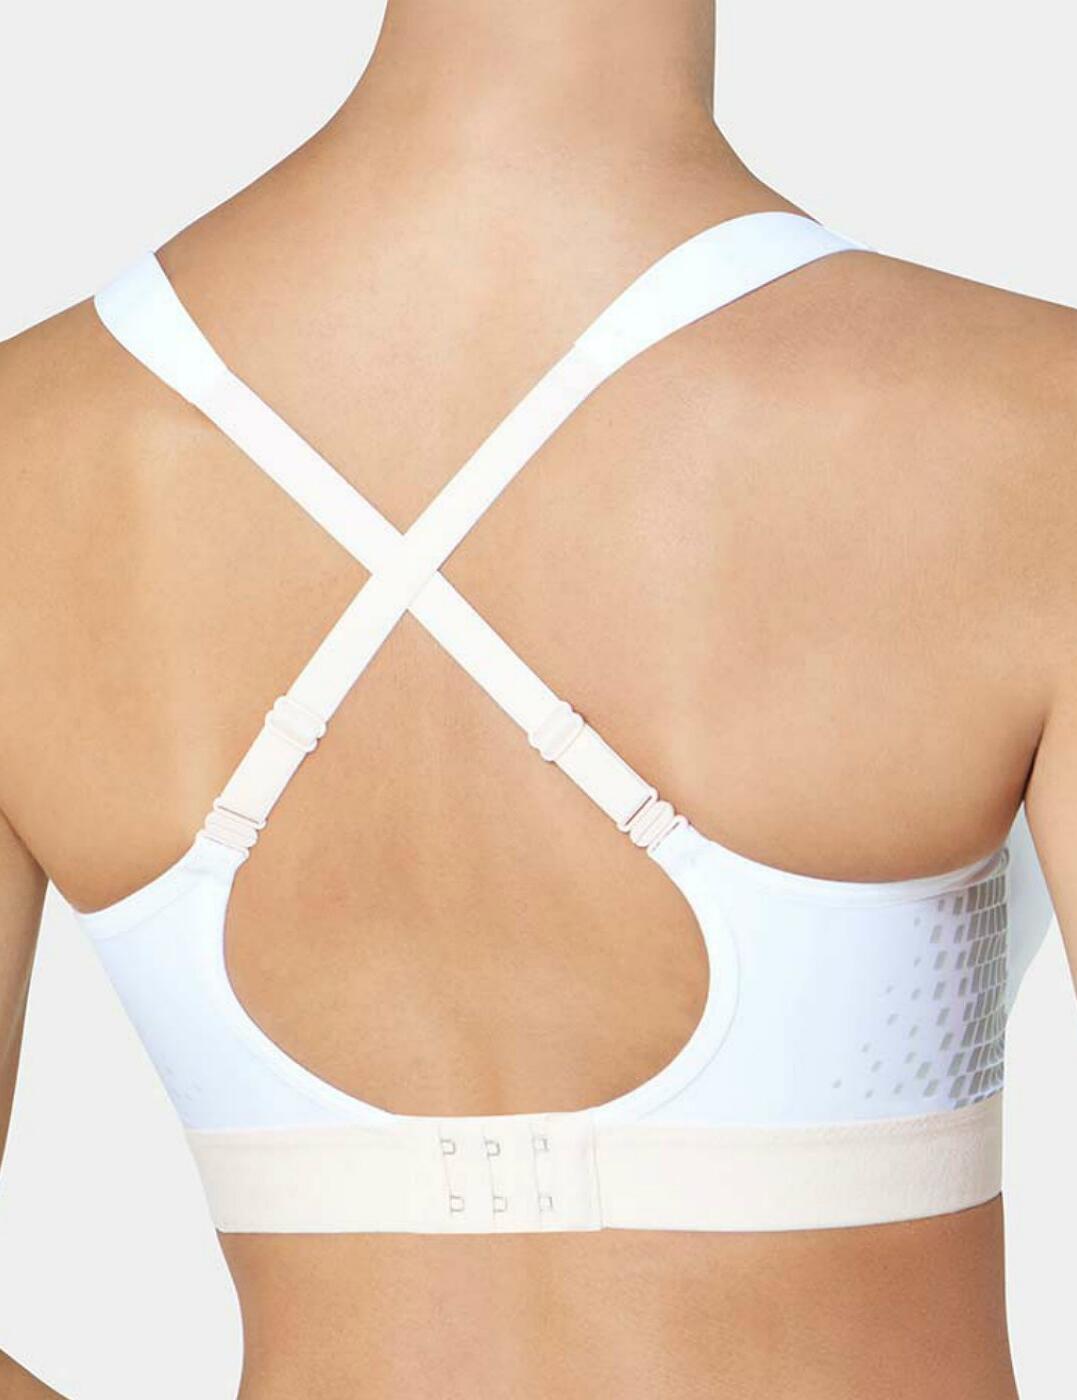 Triumph - Our multi-purpose Triaction Control Lite sports bra has straps  that perfectly adapt to your shape for great hold. #Triaction  #TriumphLingerie